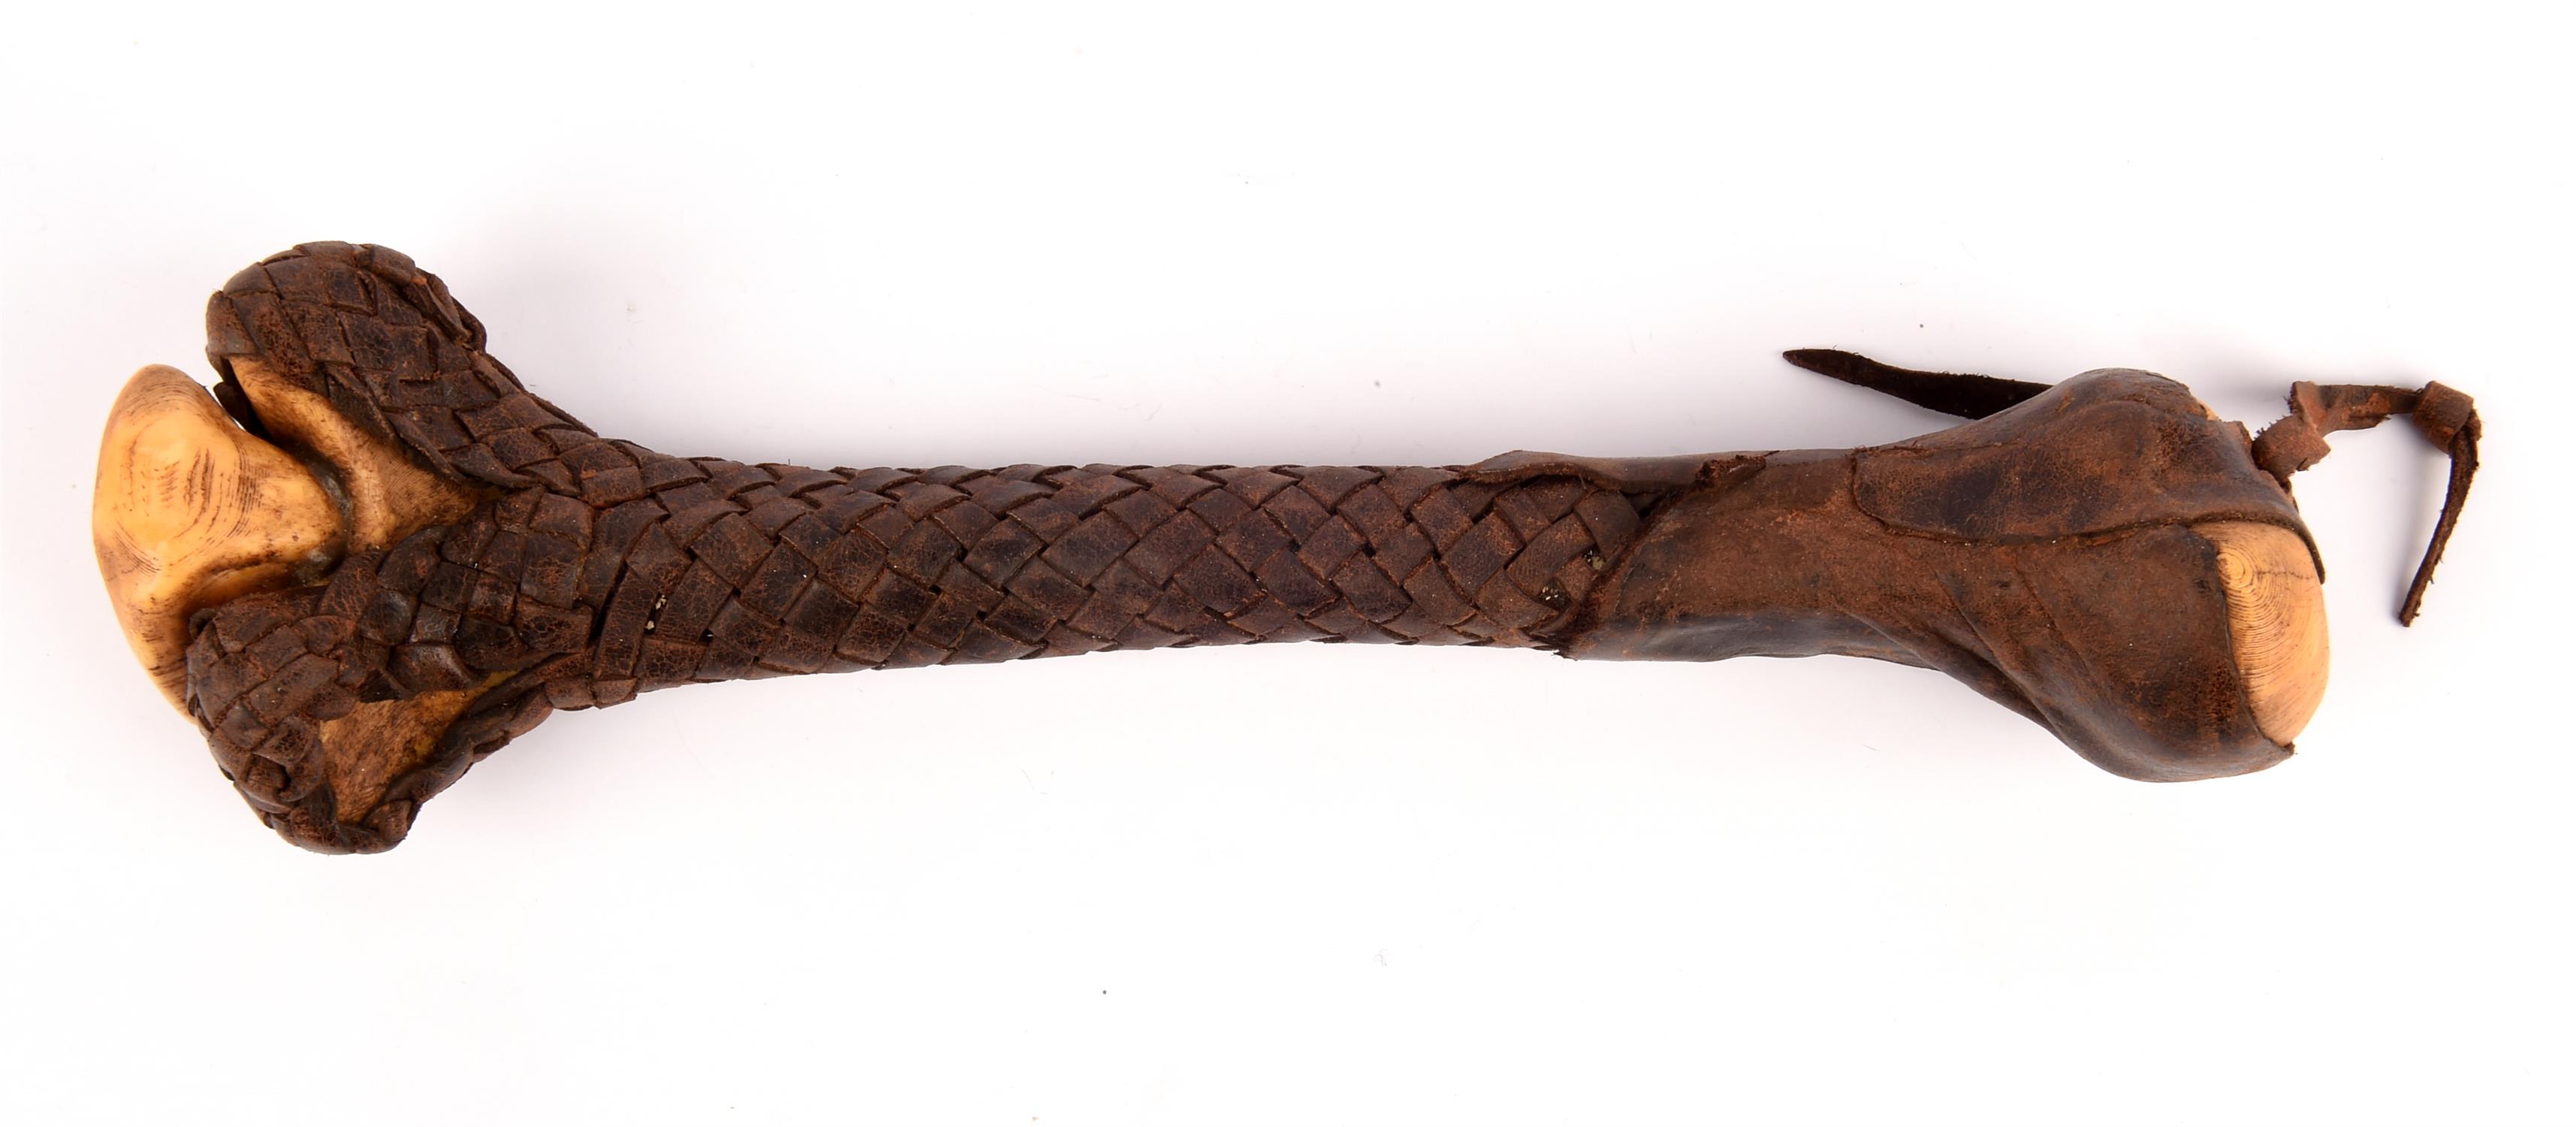 Hercules (2014) - SFX Whip Handle from the Dwayne Johnson film used by Peter Mullen as Sitacles,